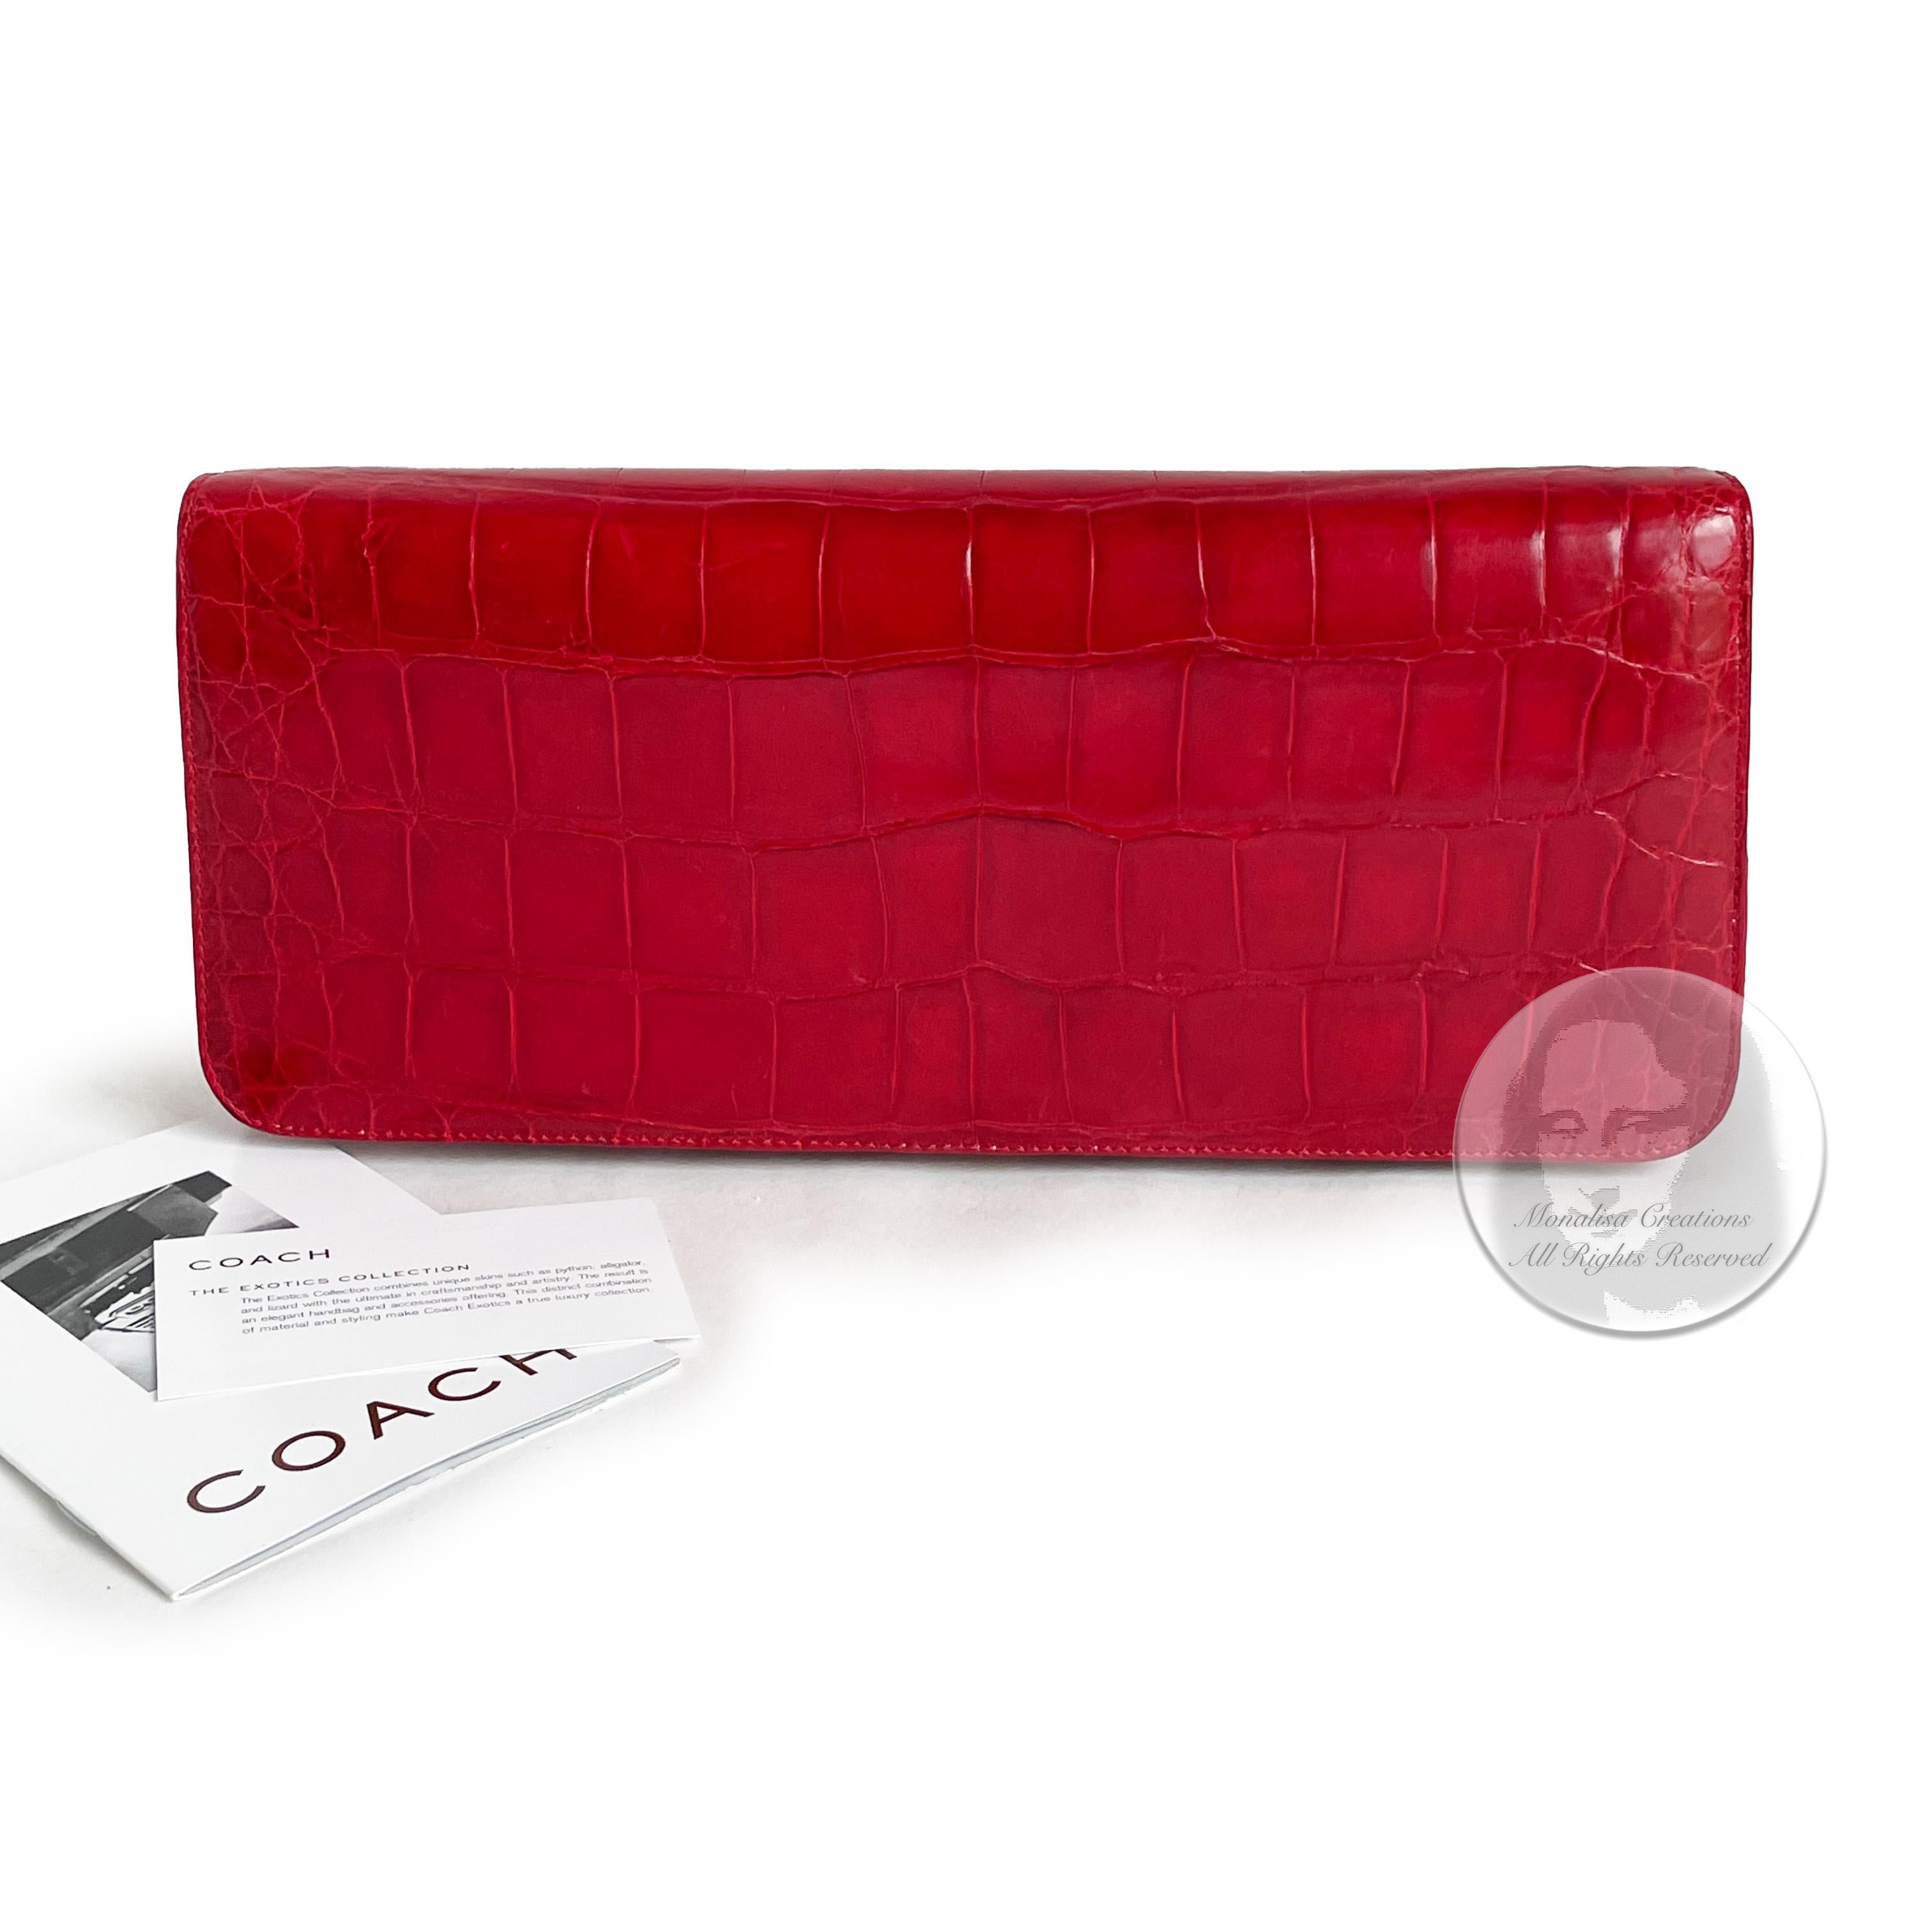 Women's or Men's Coach Large Clutch Bag #8389 Italy Limited Edition Red Exotic Alligator HTF Rare For Sale